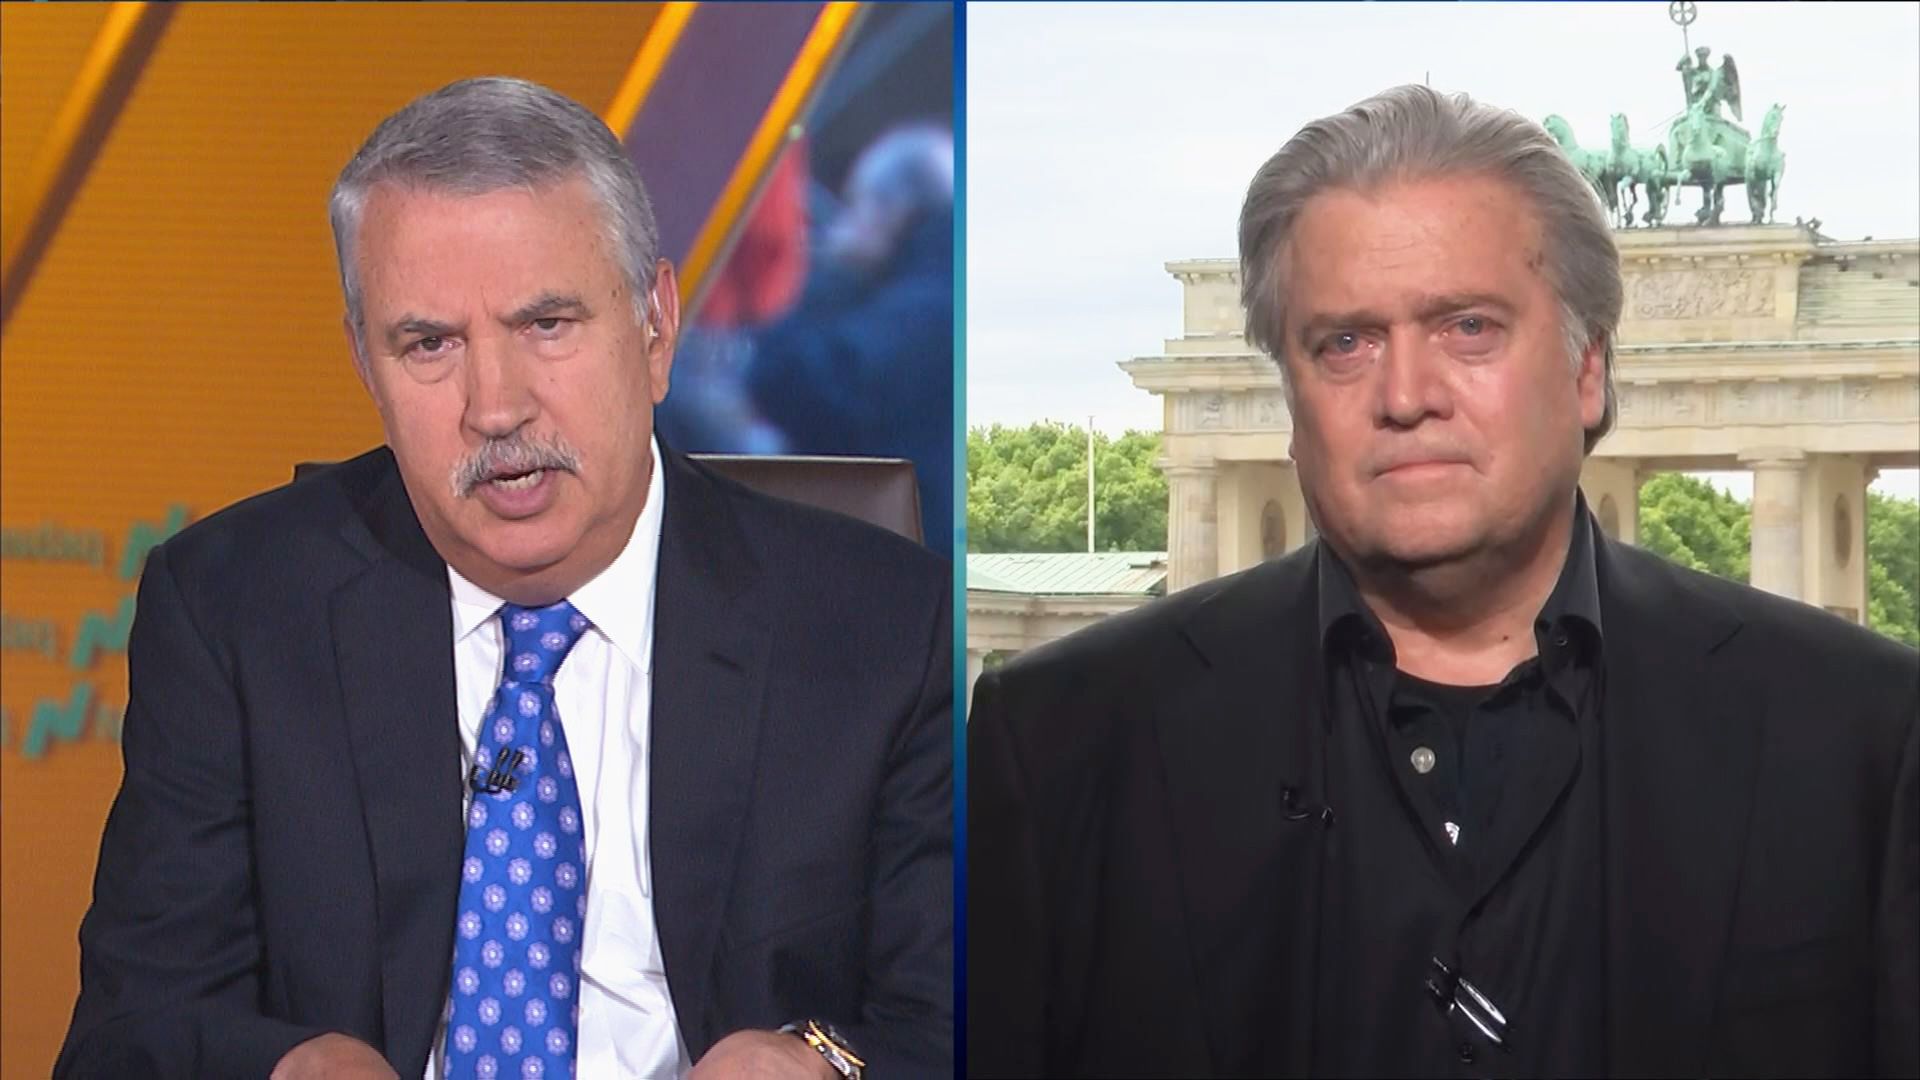 Steve Bannon and Tom Friedman agree Trump right to hit China on trade